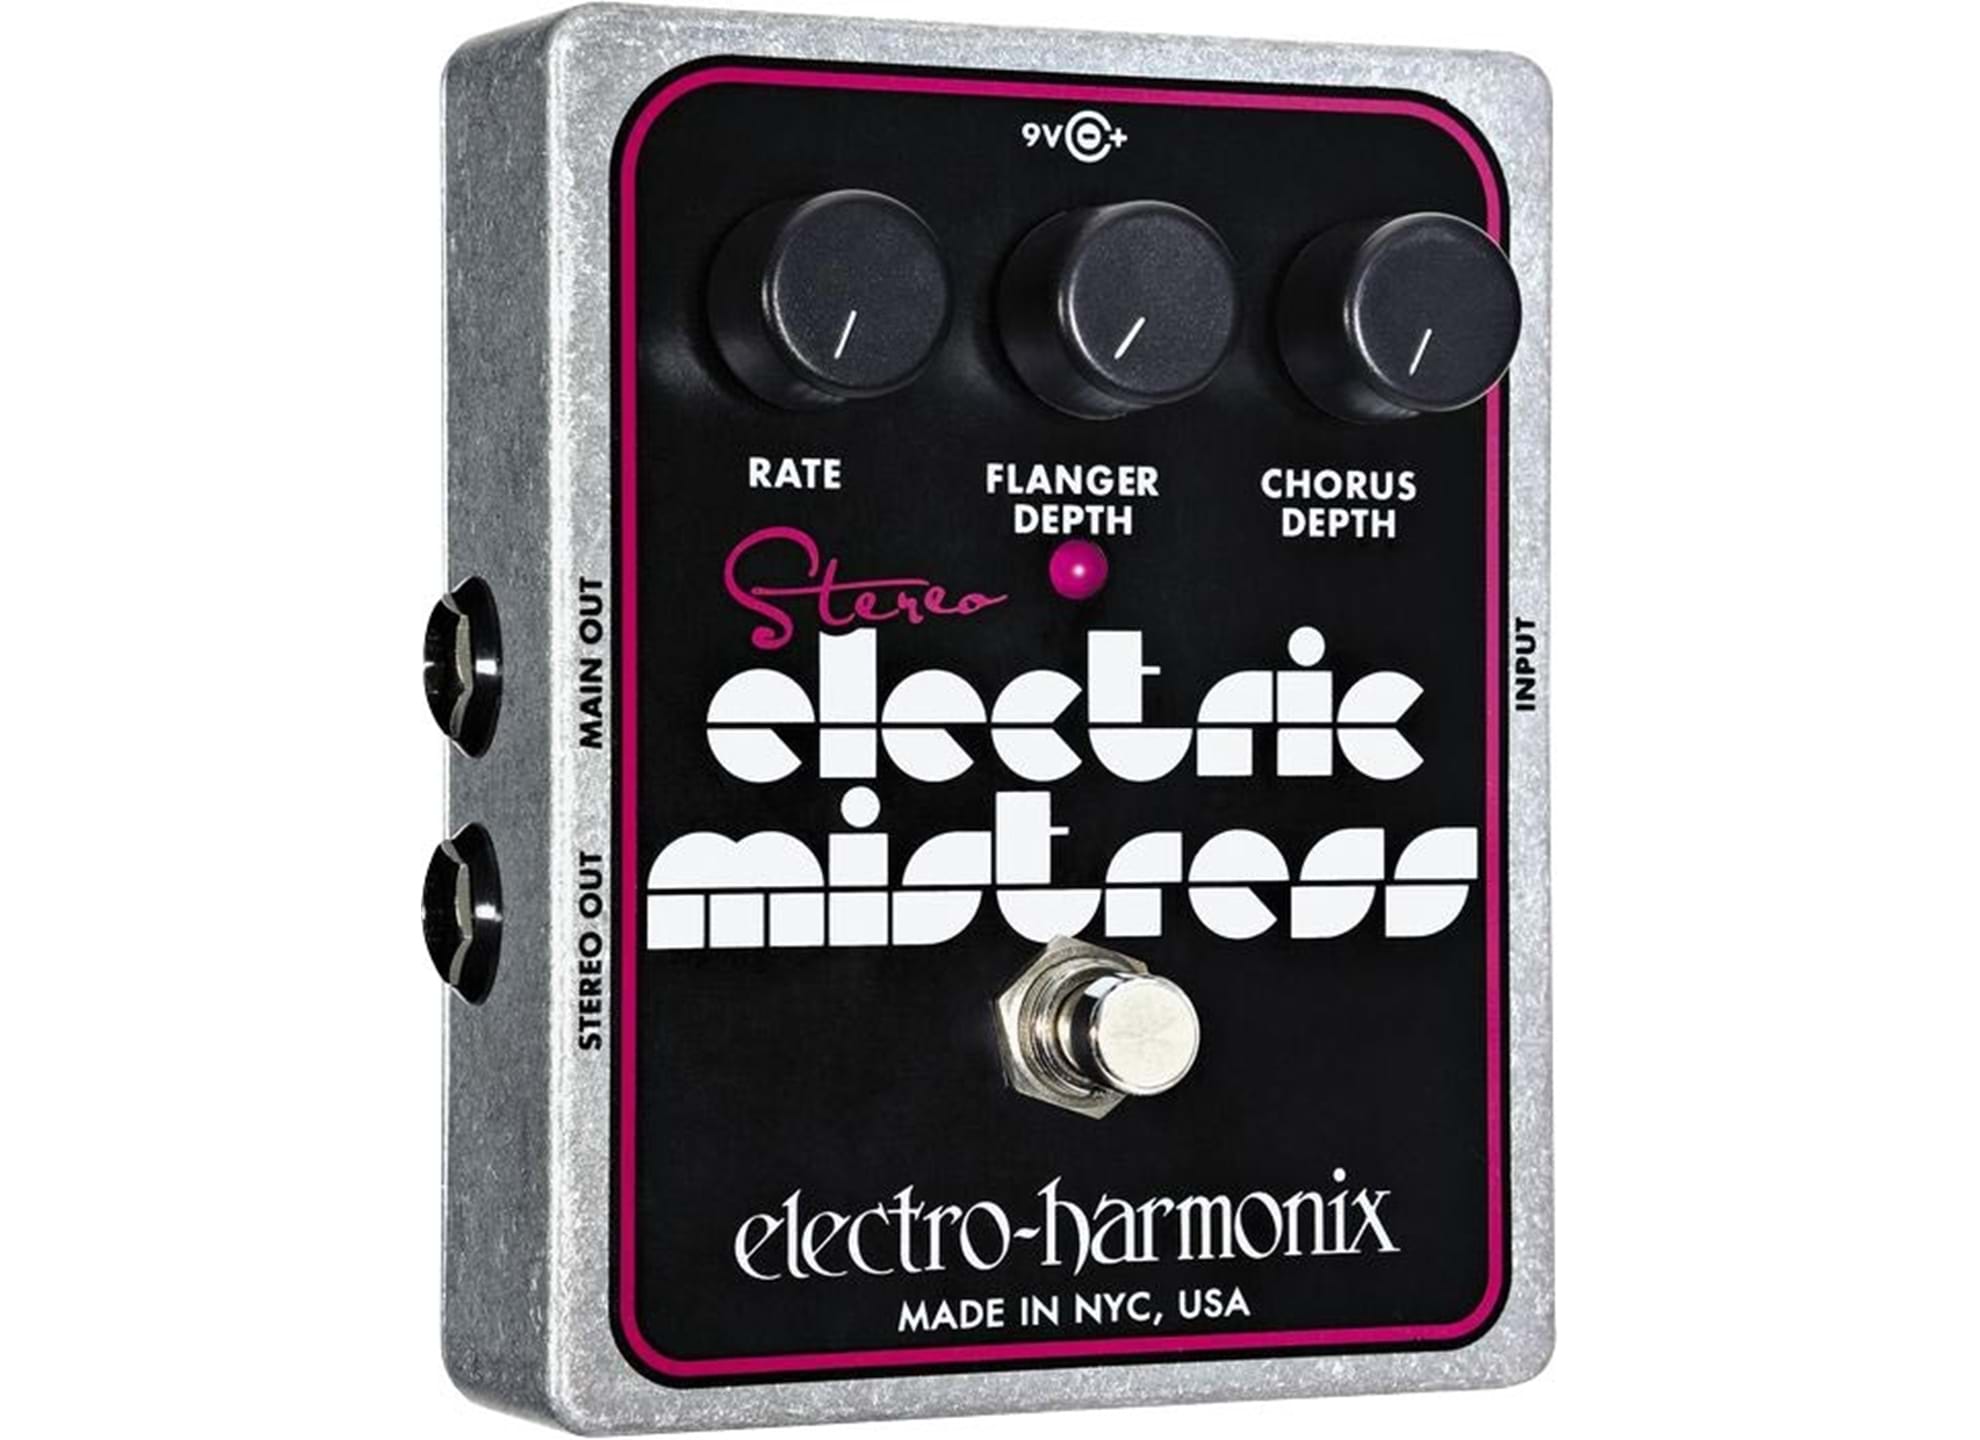 Stereo Electric Mistress